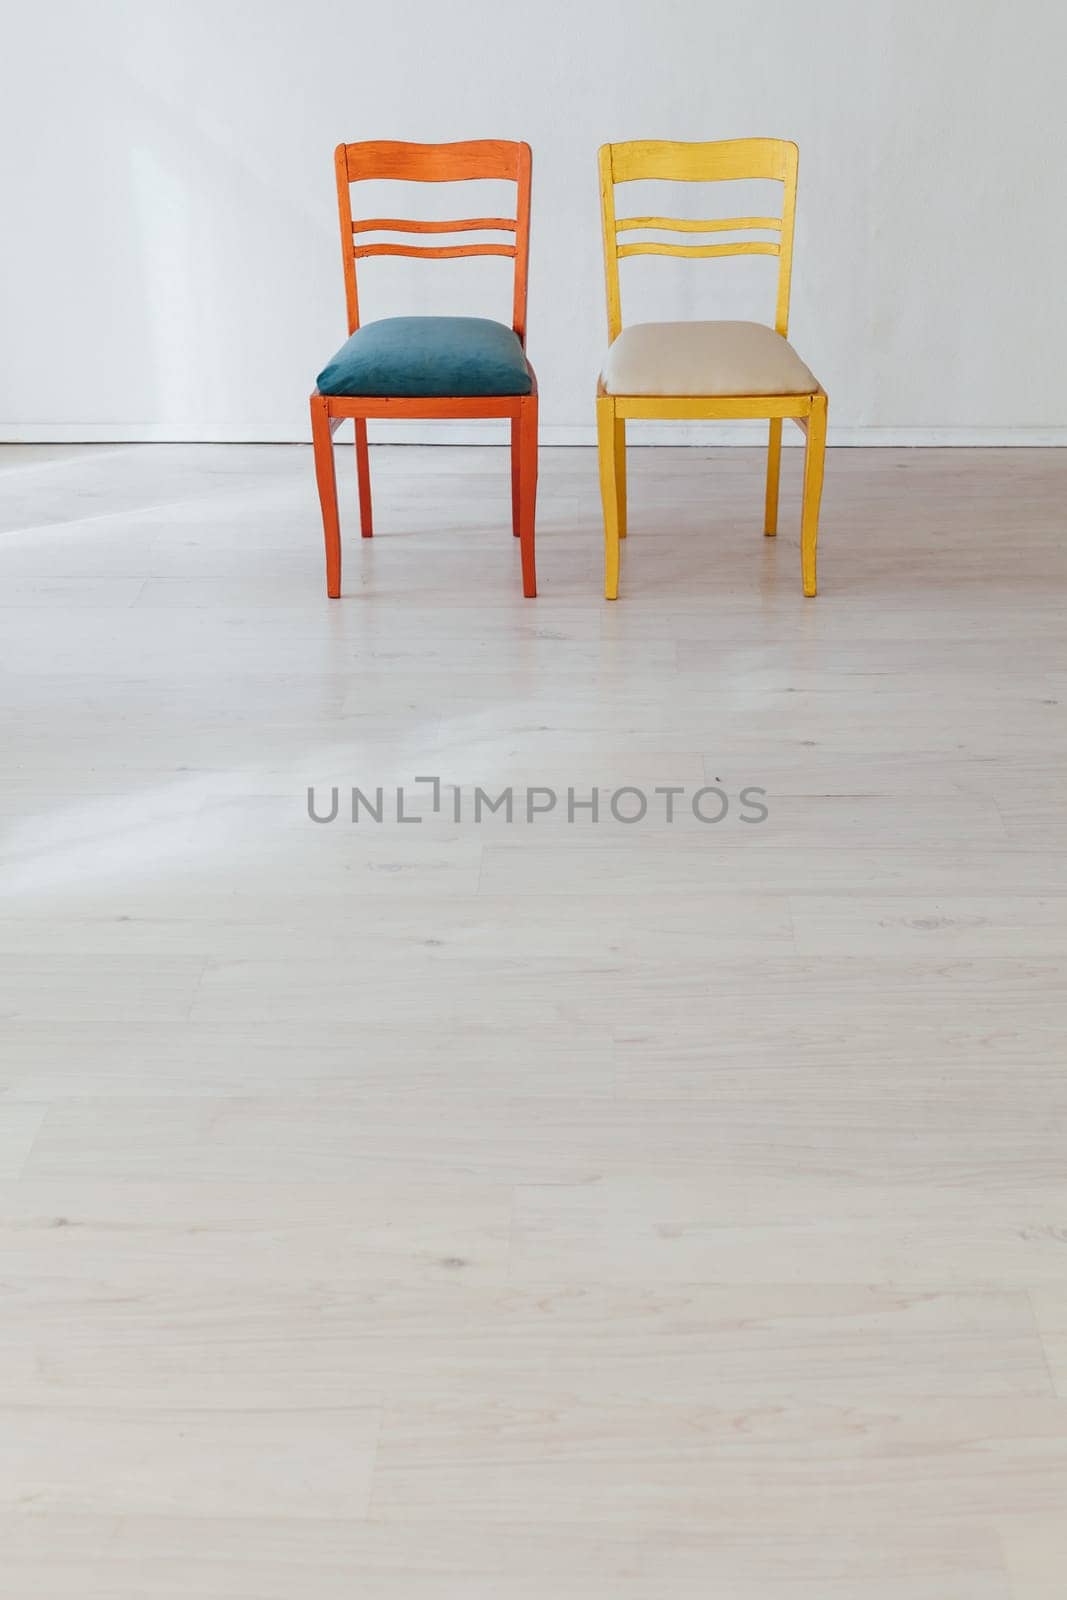 two chairs in the interior of an empty white room by Simakov